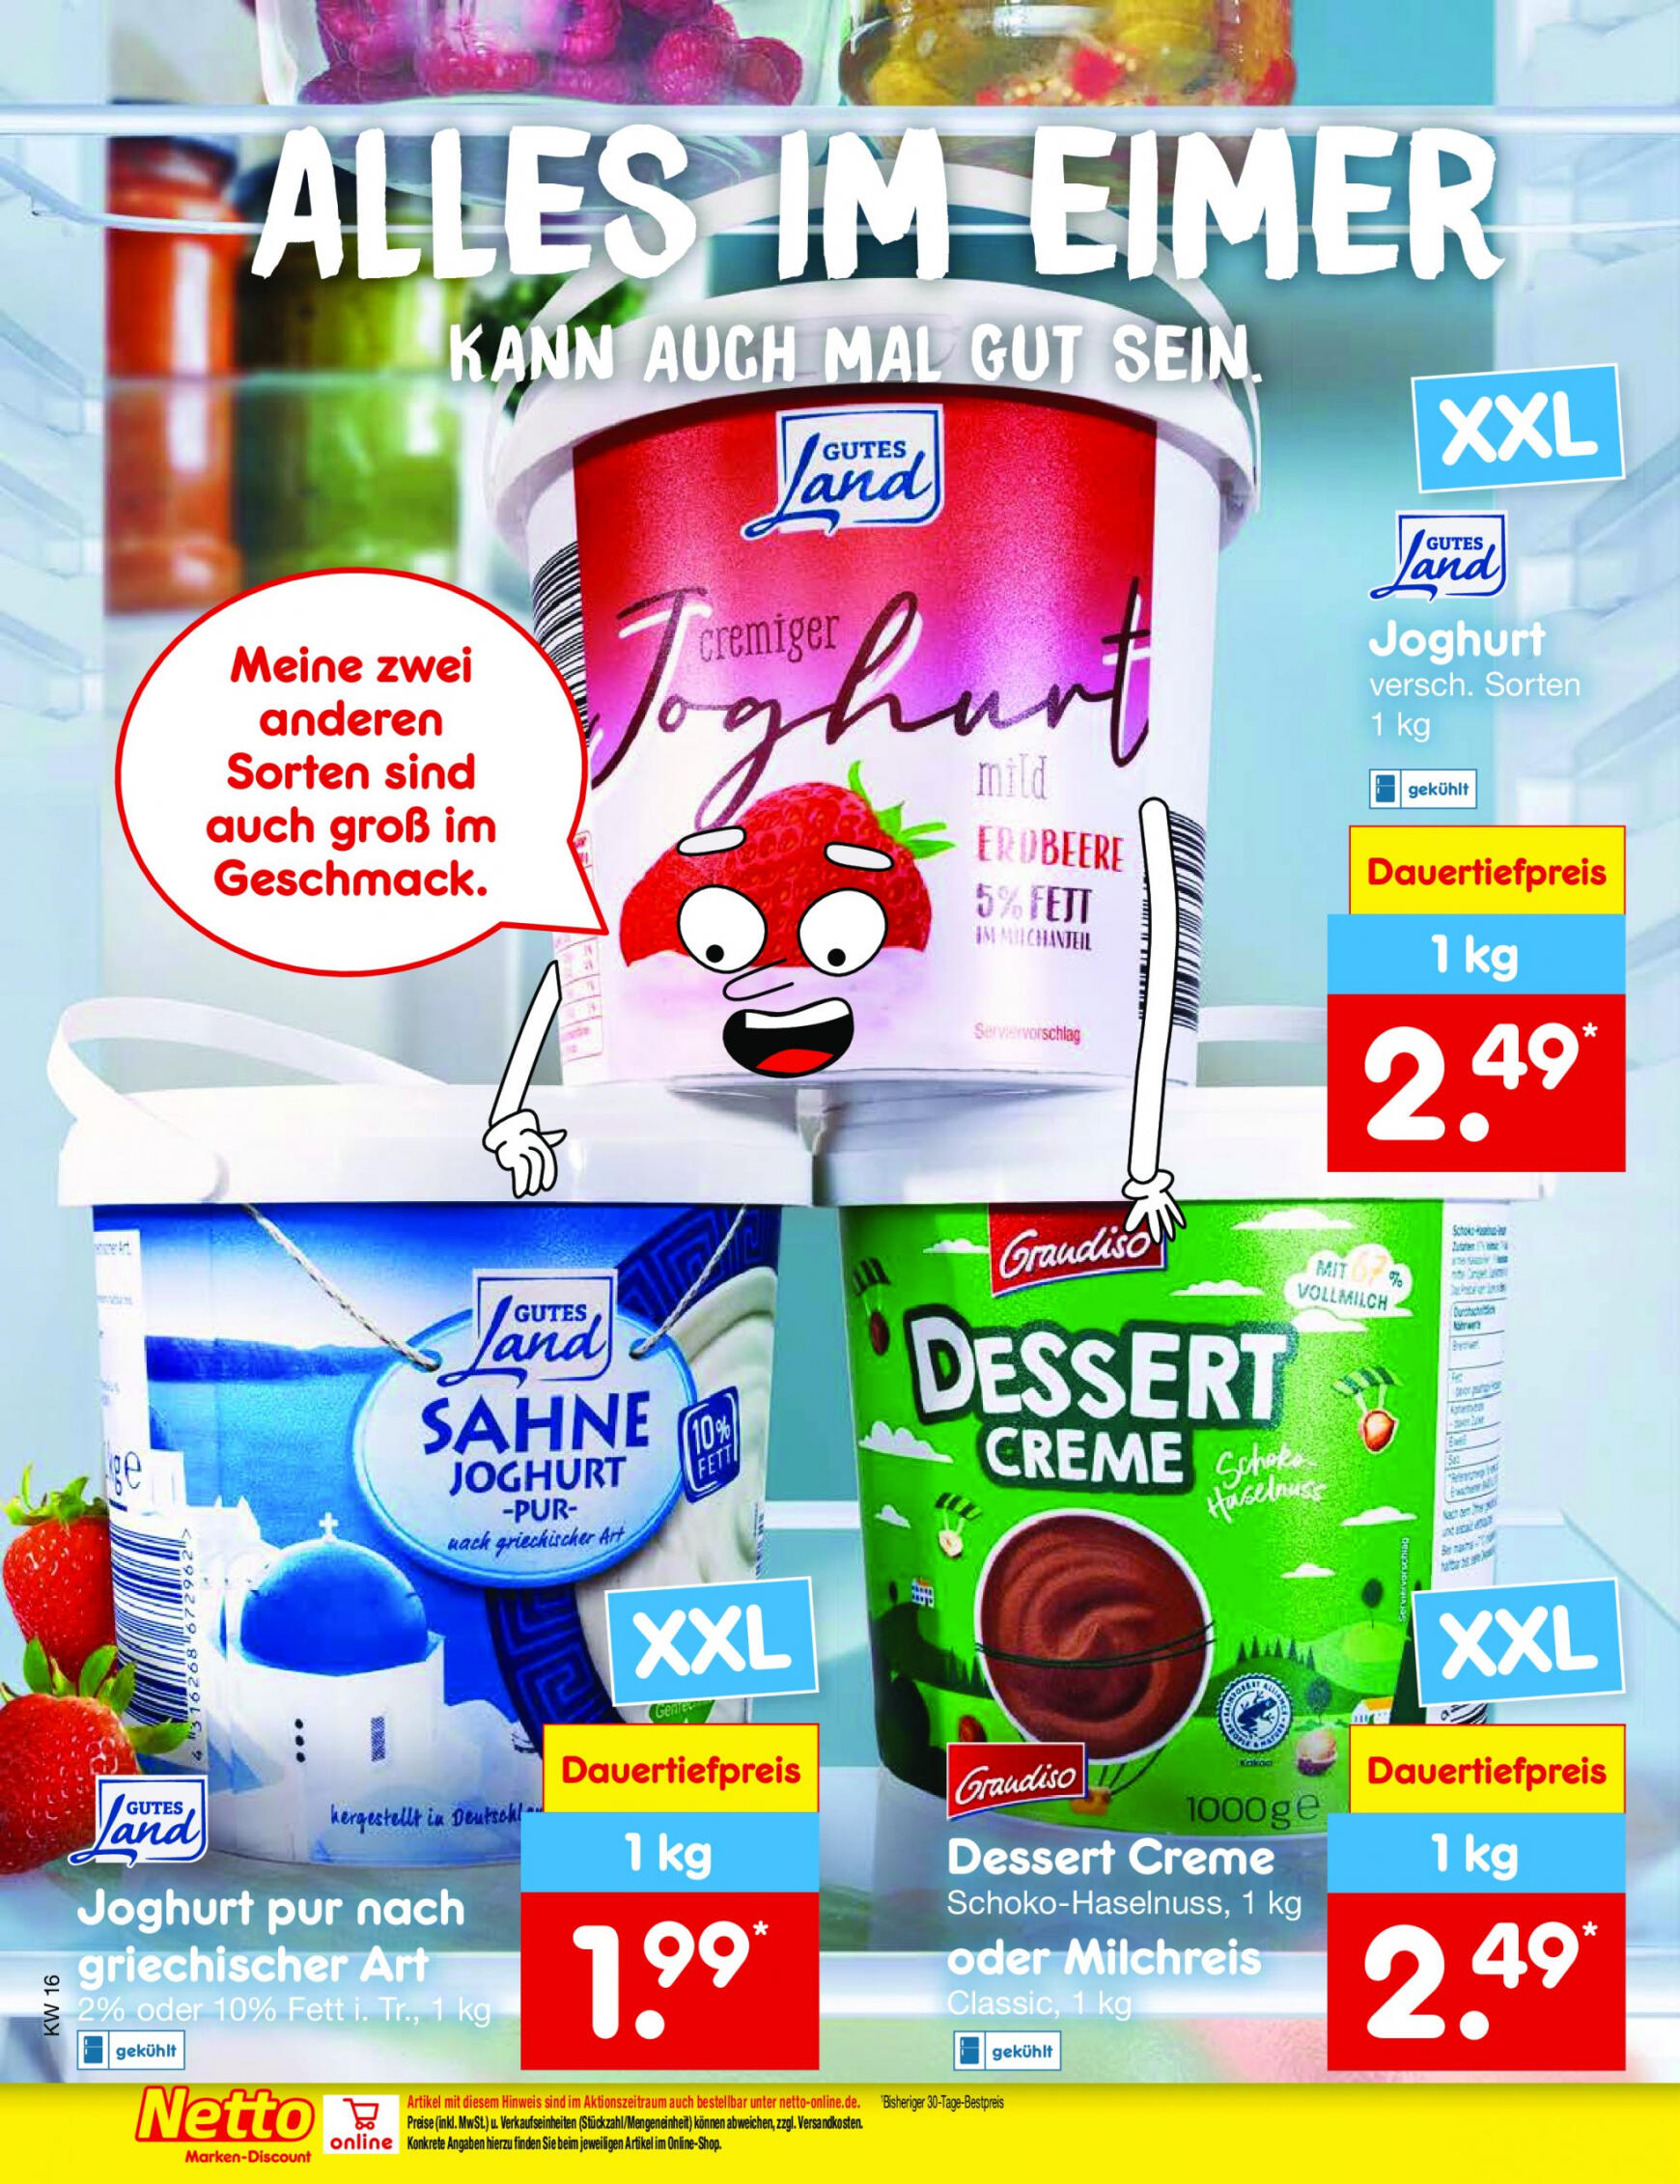 netto - Flyer Netto aktuell 15.04. - 20.04. - page: 16